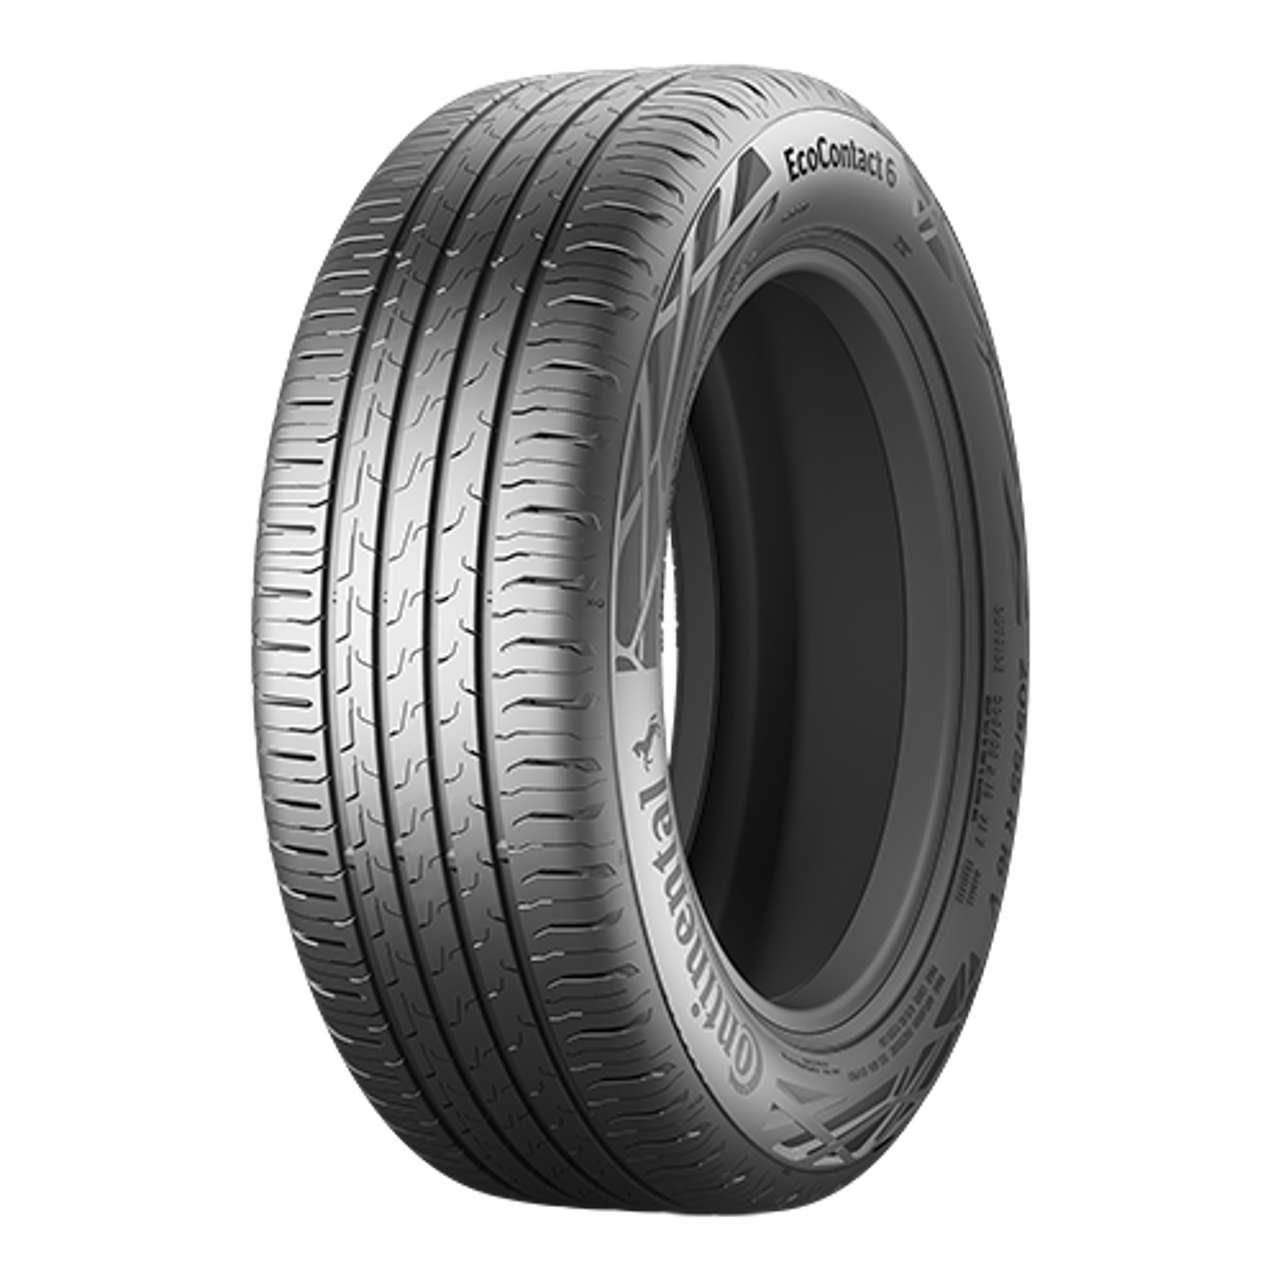 CONTINENTAL ECOCONTACT 6Q (*) (MO) (EVc) 275/40R19 105Y FR BSW